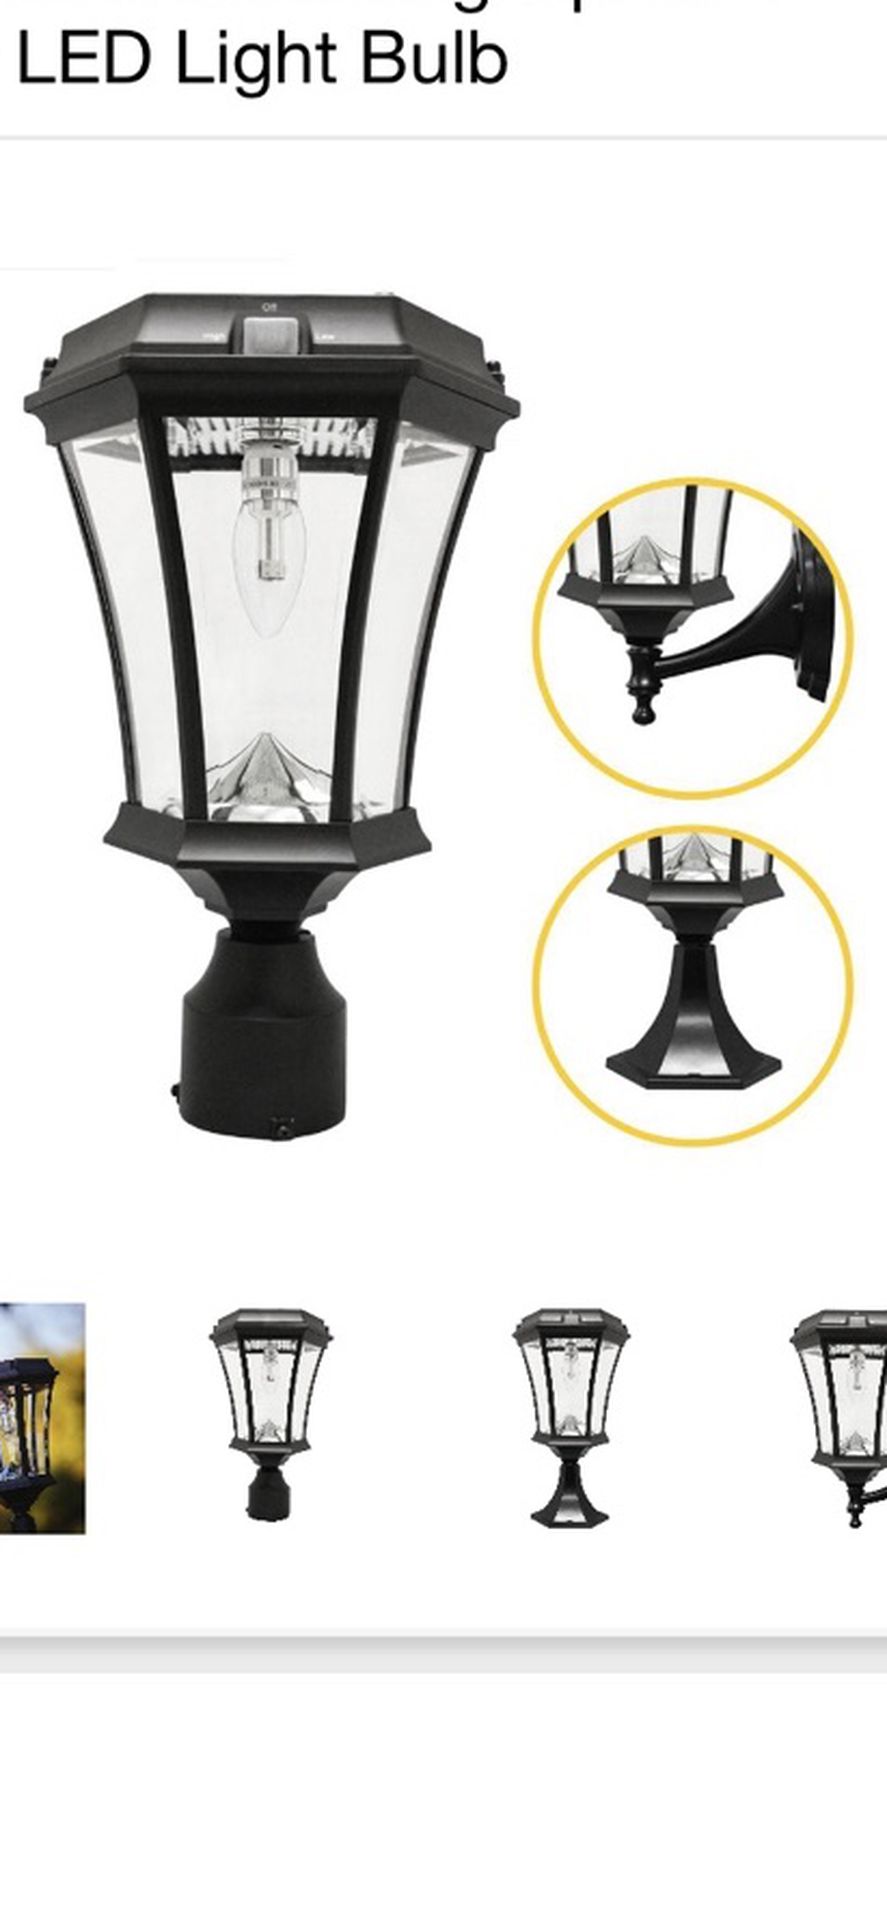 GAMA SONIC Victorian Bulb Series Single Black Integrated LED Outdoor Solar Lamp with 3-Mounting Options and GS Solar LED Light Bulb